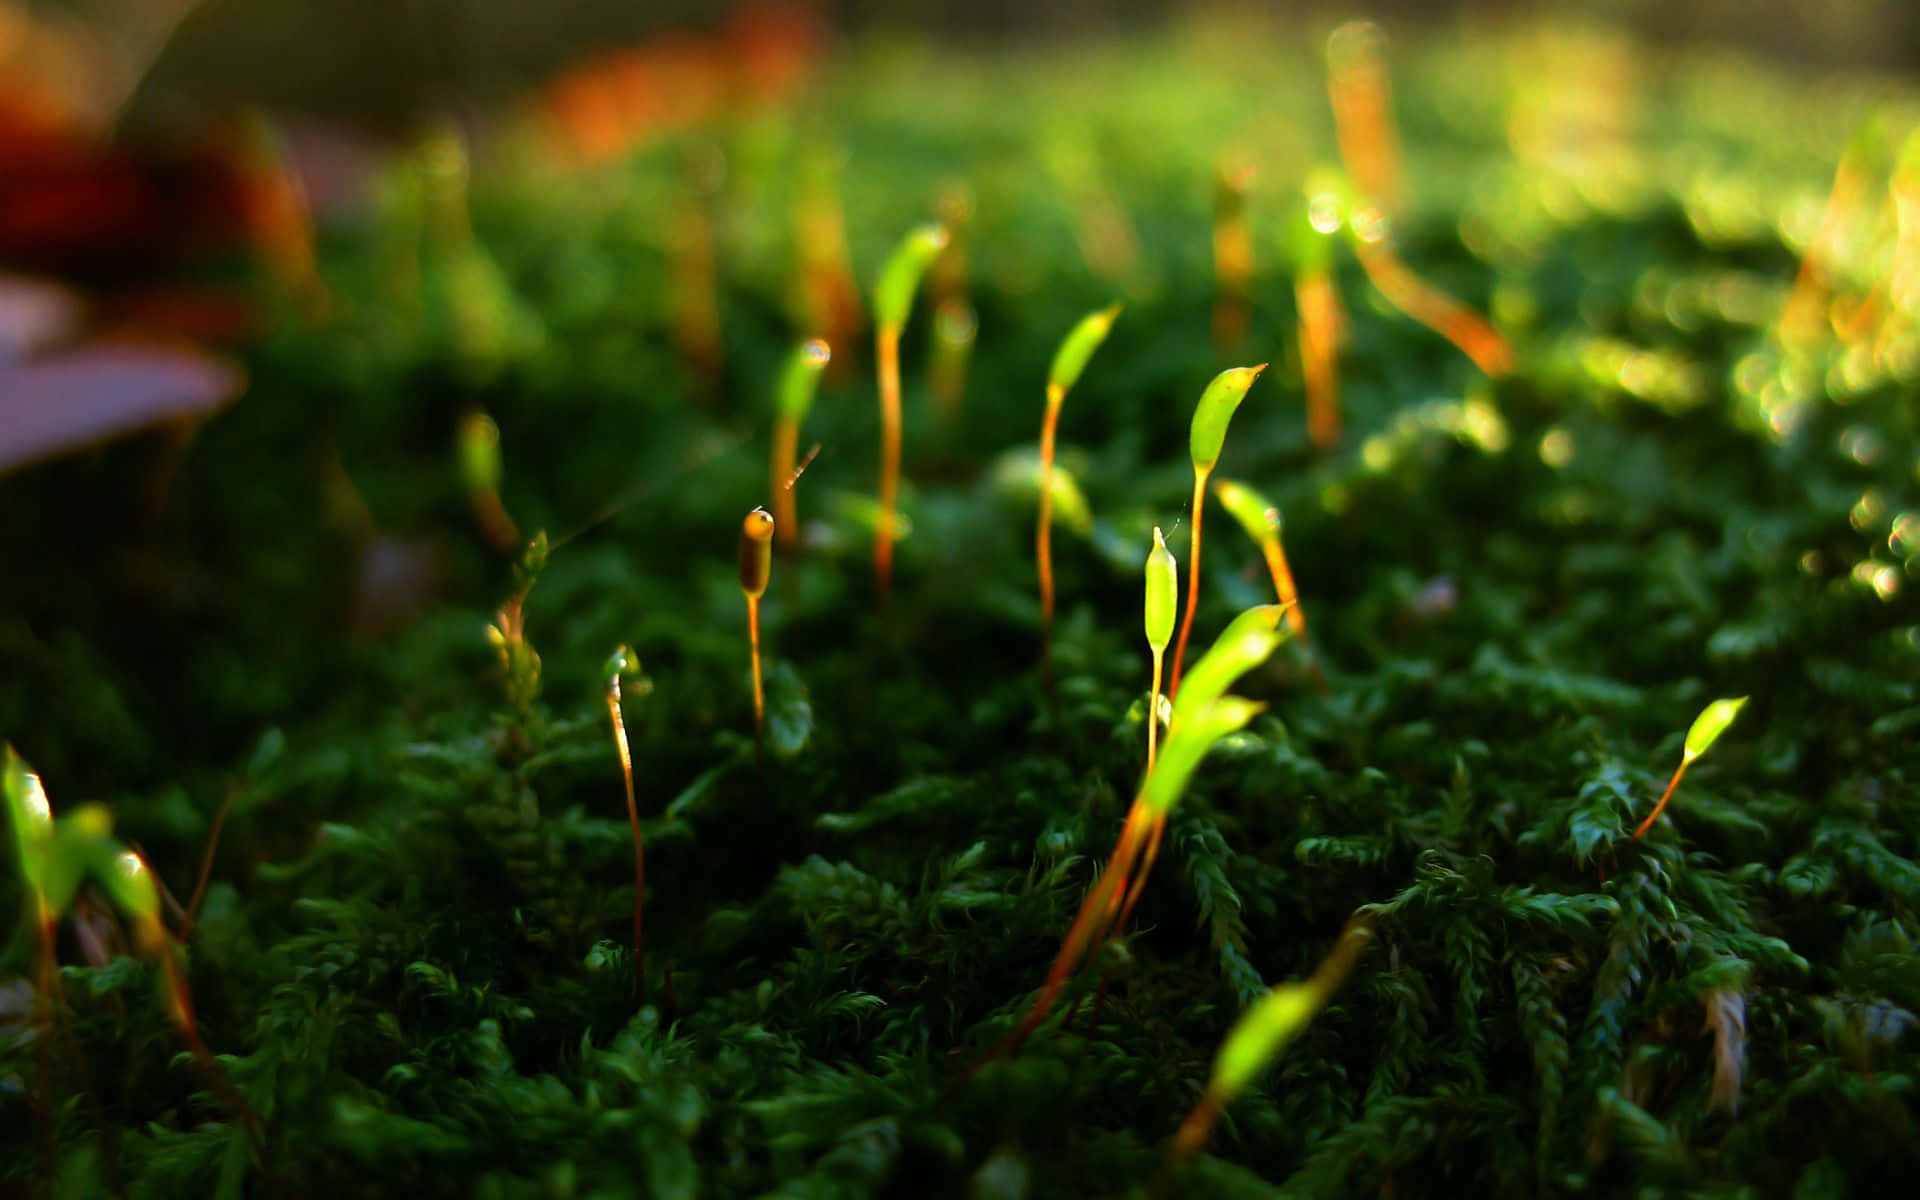 A close-up view of soft, lush moss in nature.